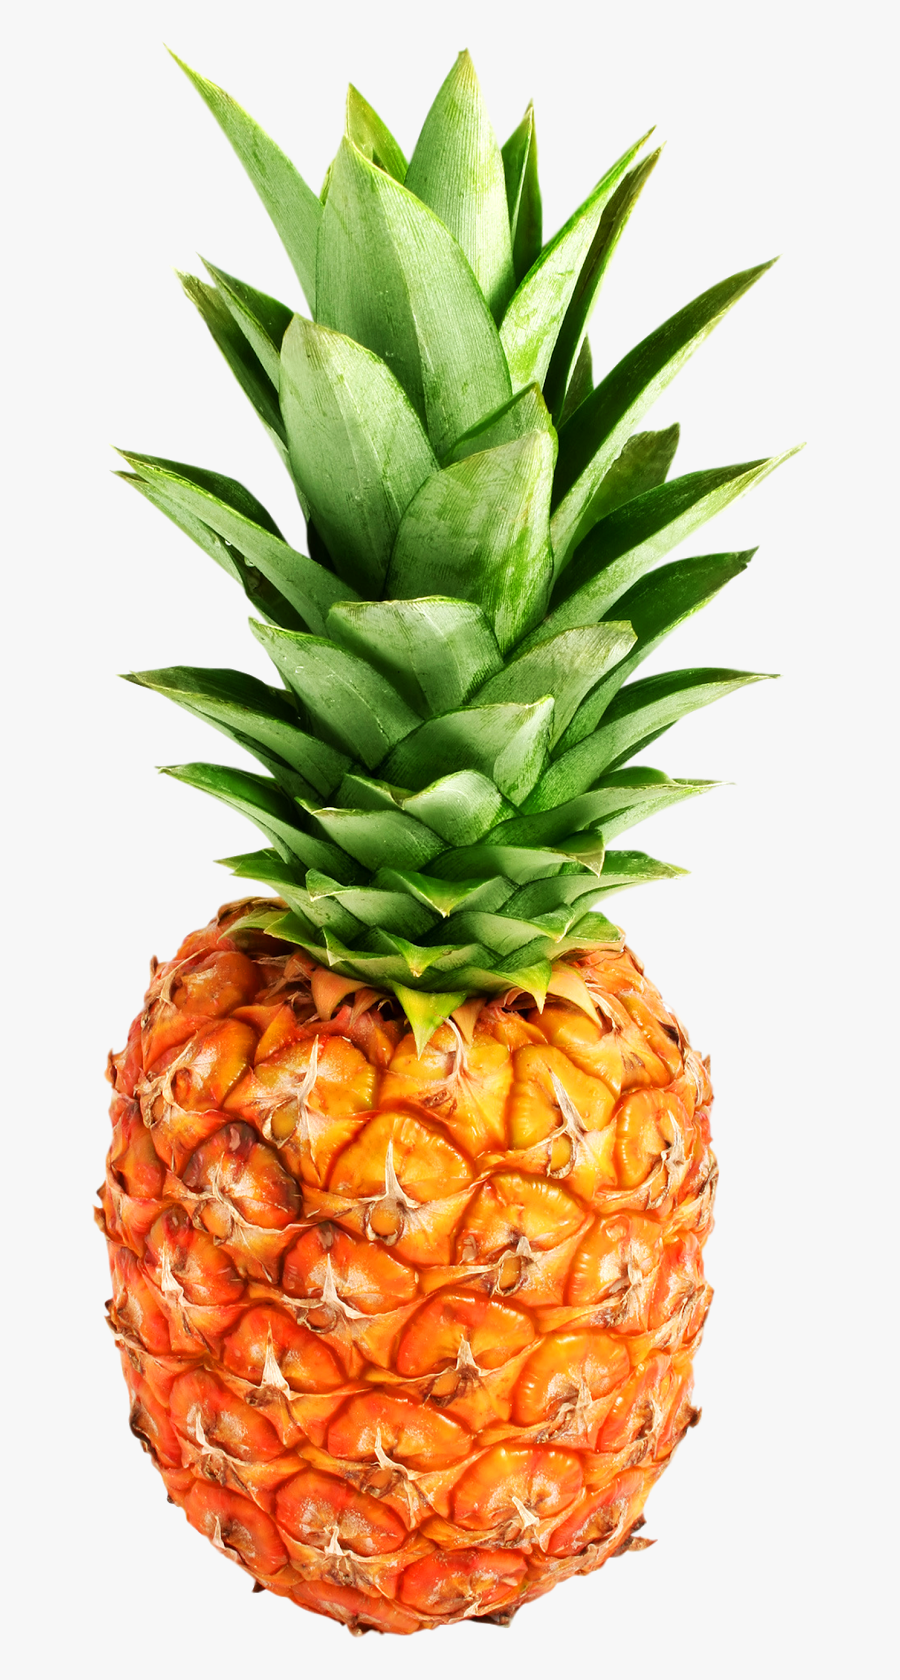 Pineapple Png Download - Pineapple Png, Transparent Clipart